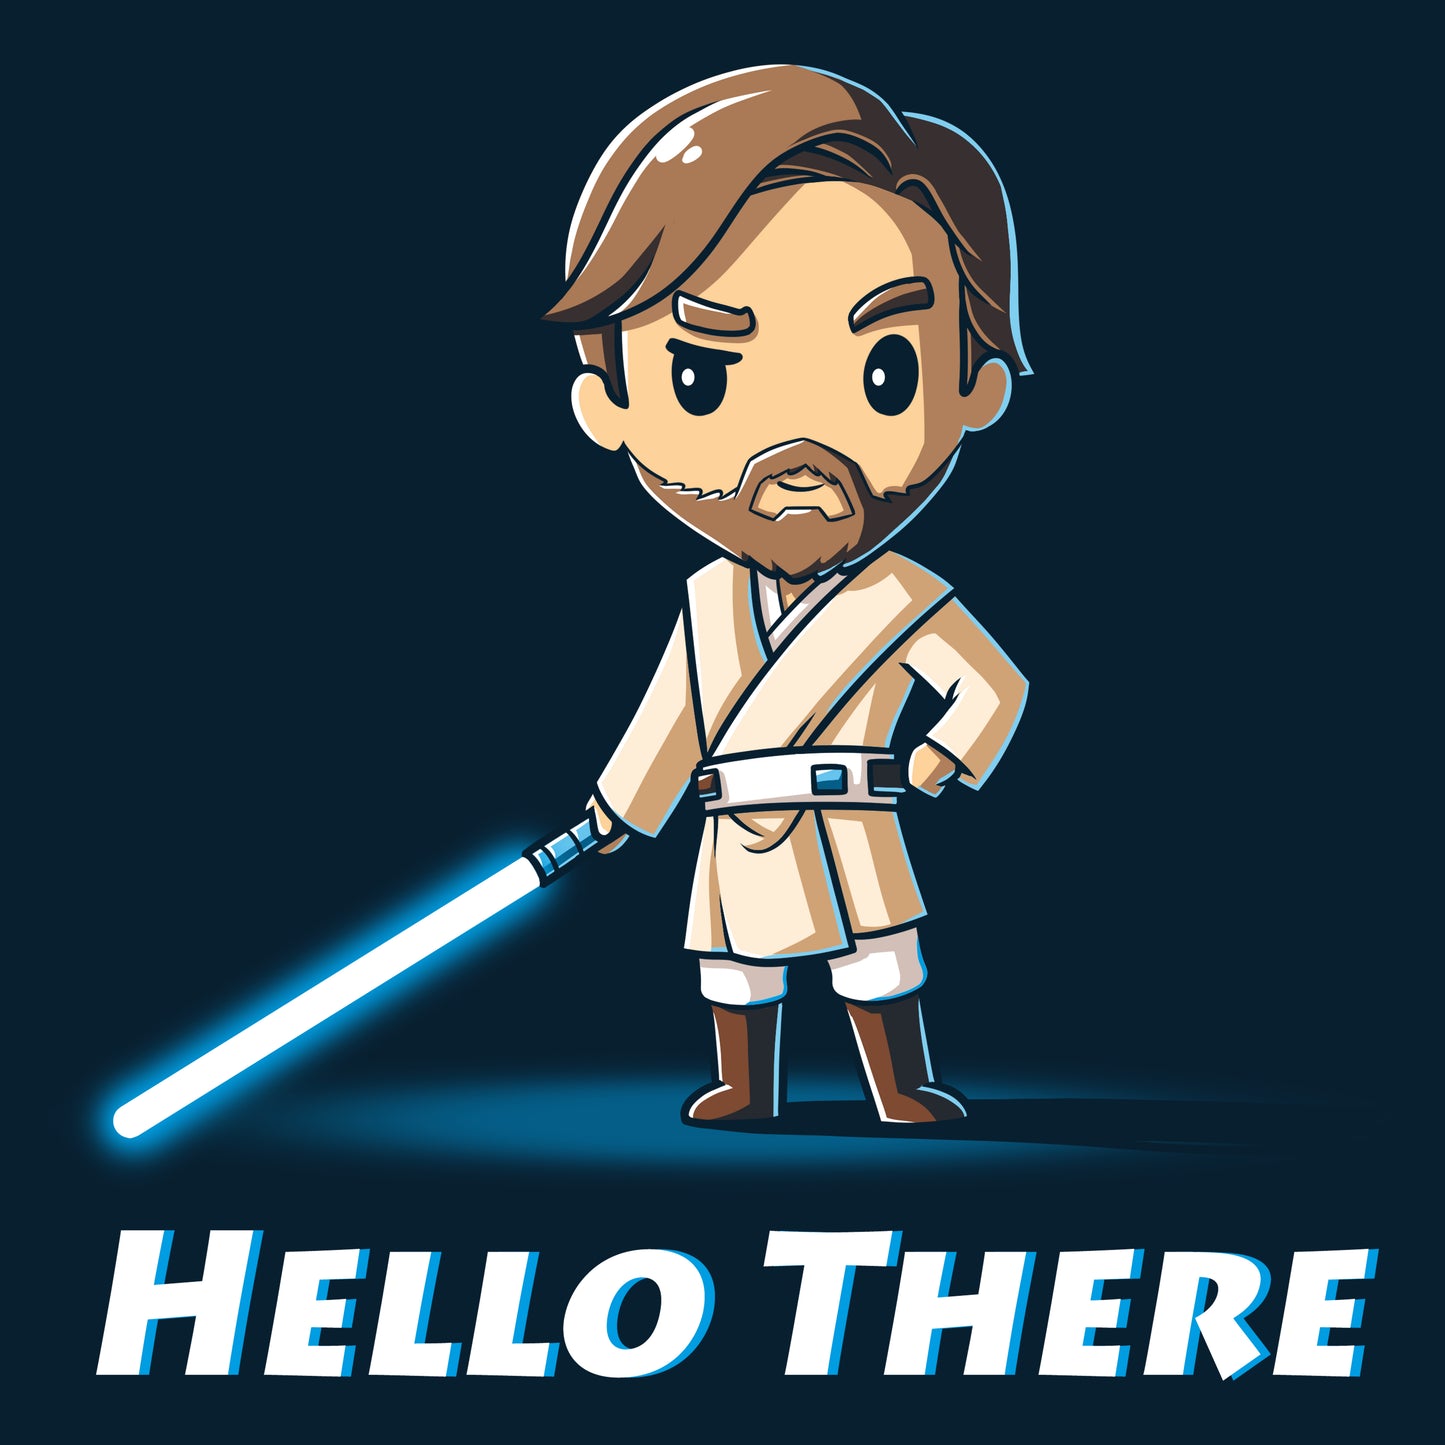 A Star Wars Hello There T-shirt featuring Obi-Wan Kenobi holding a lightsaber and saying hello there.